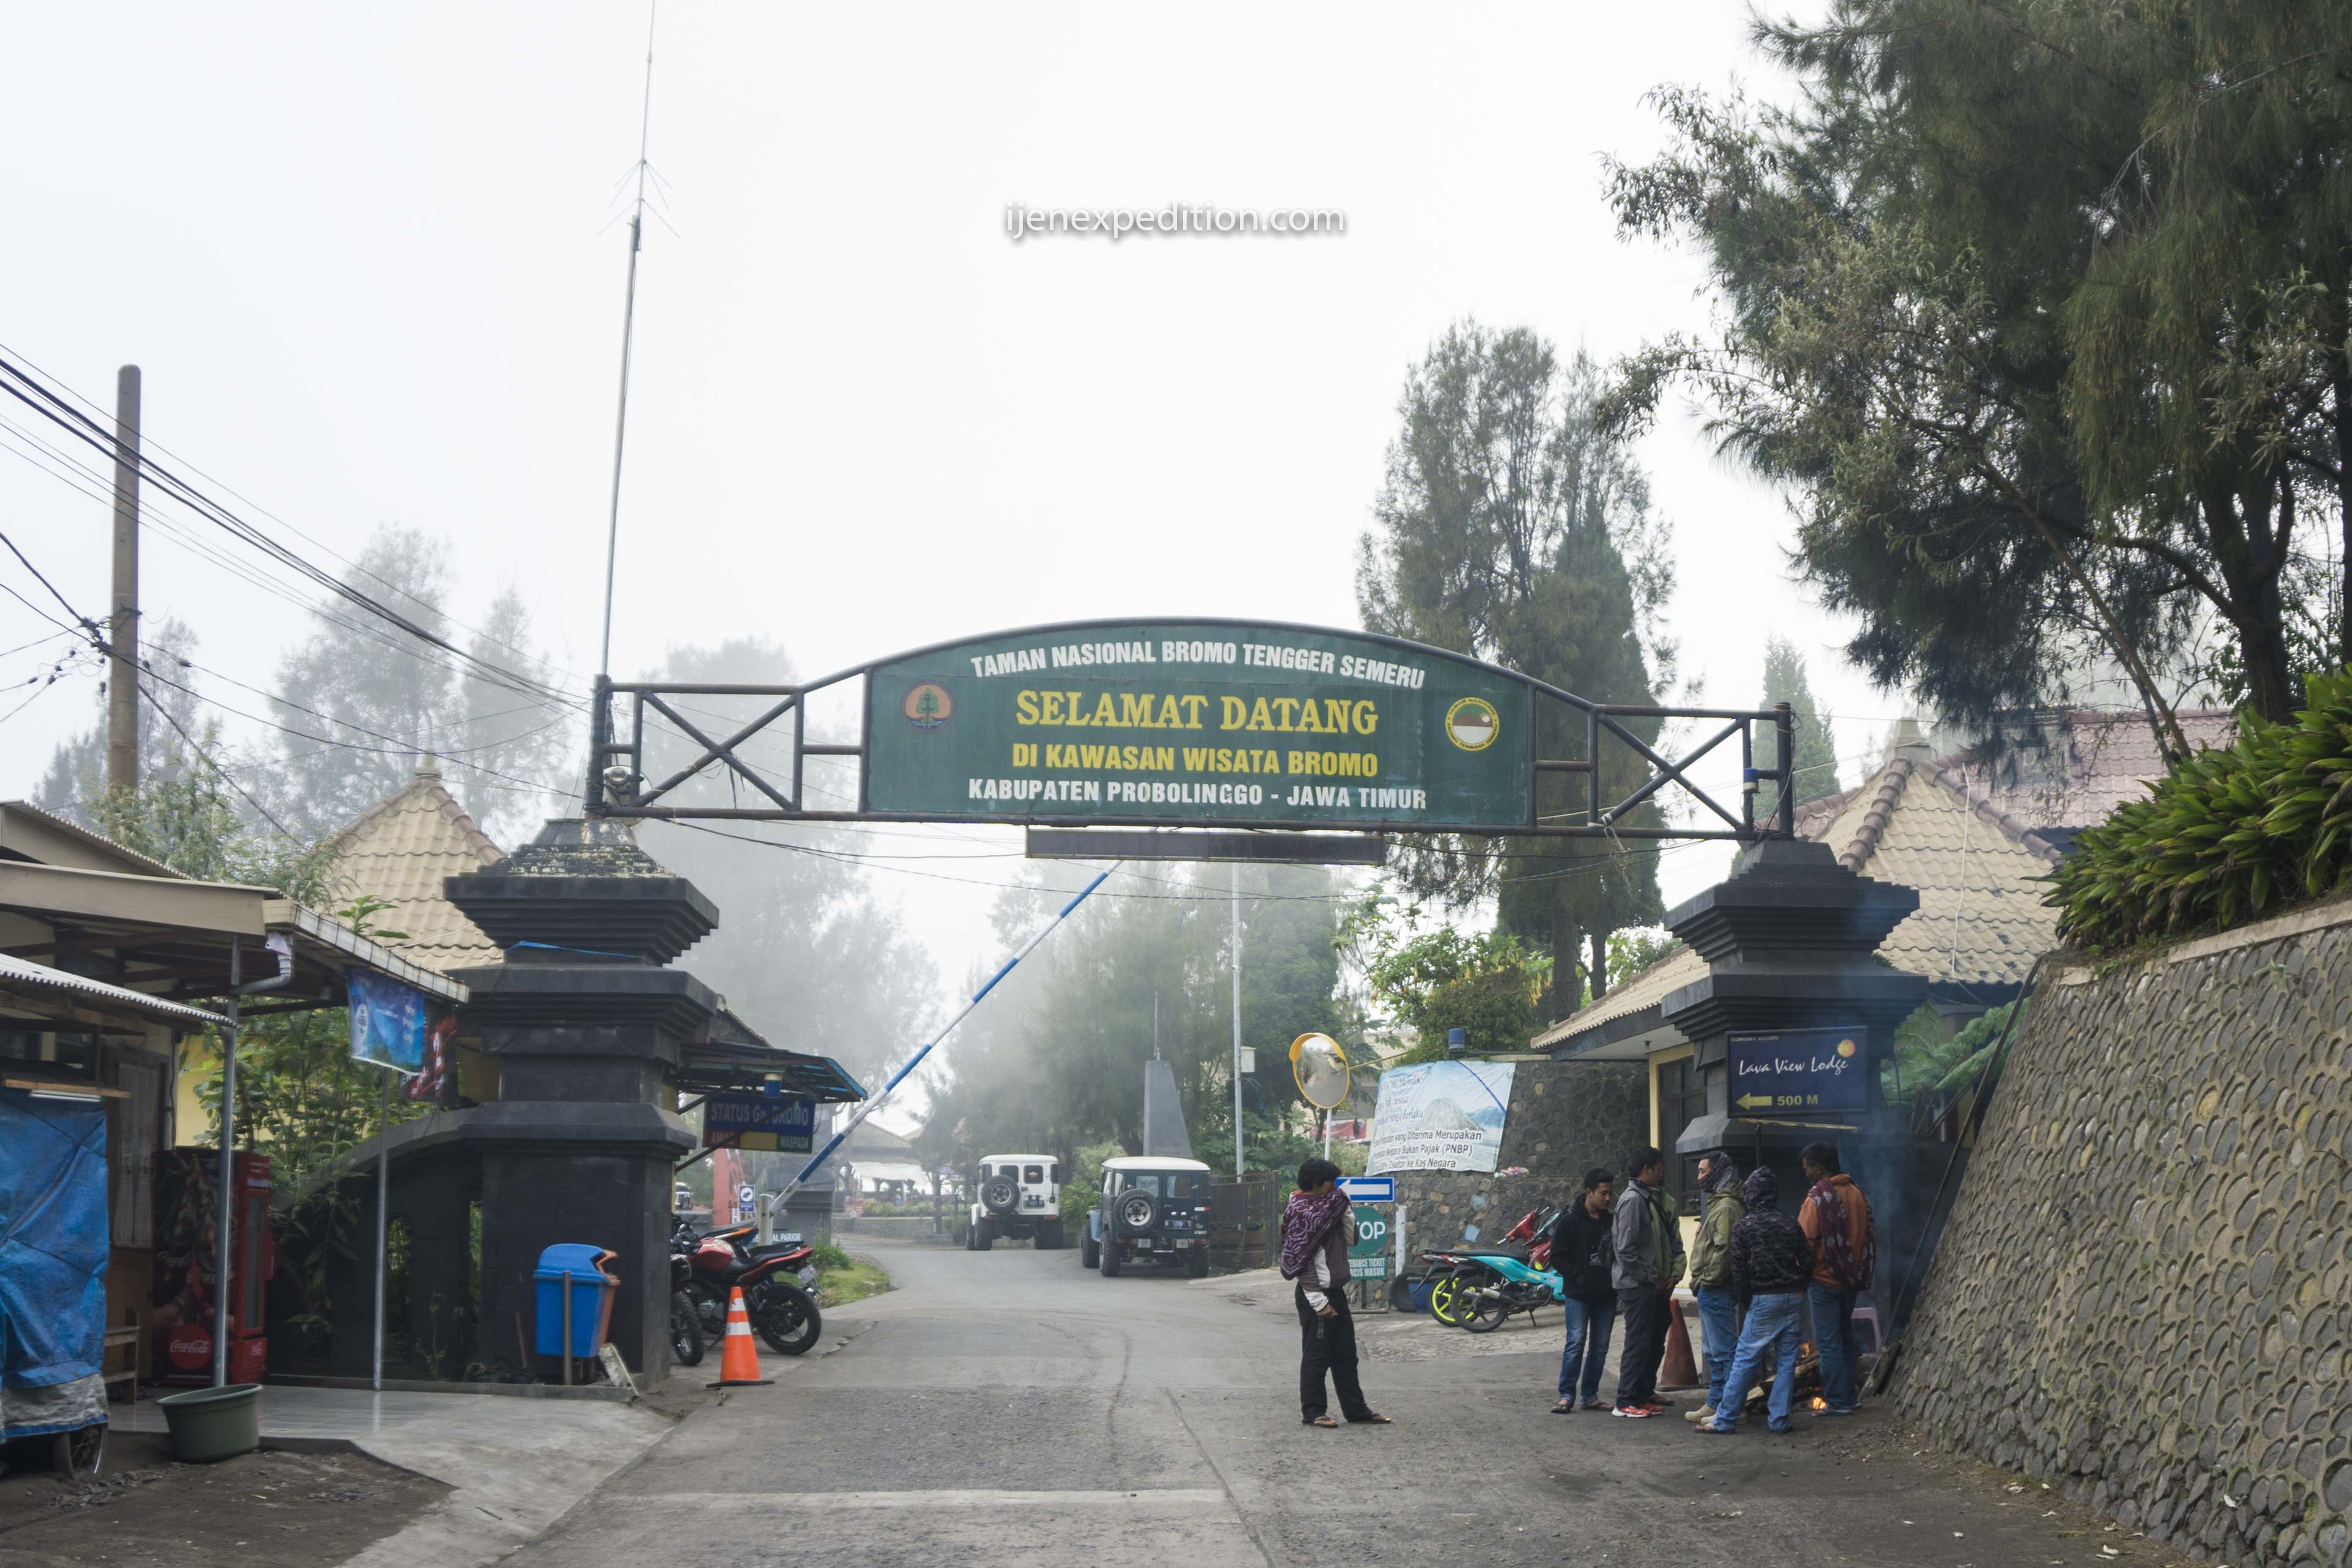 Mount Bromo Tour | A Complete Guide to Exploring East Java's Iconic Volcano